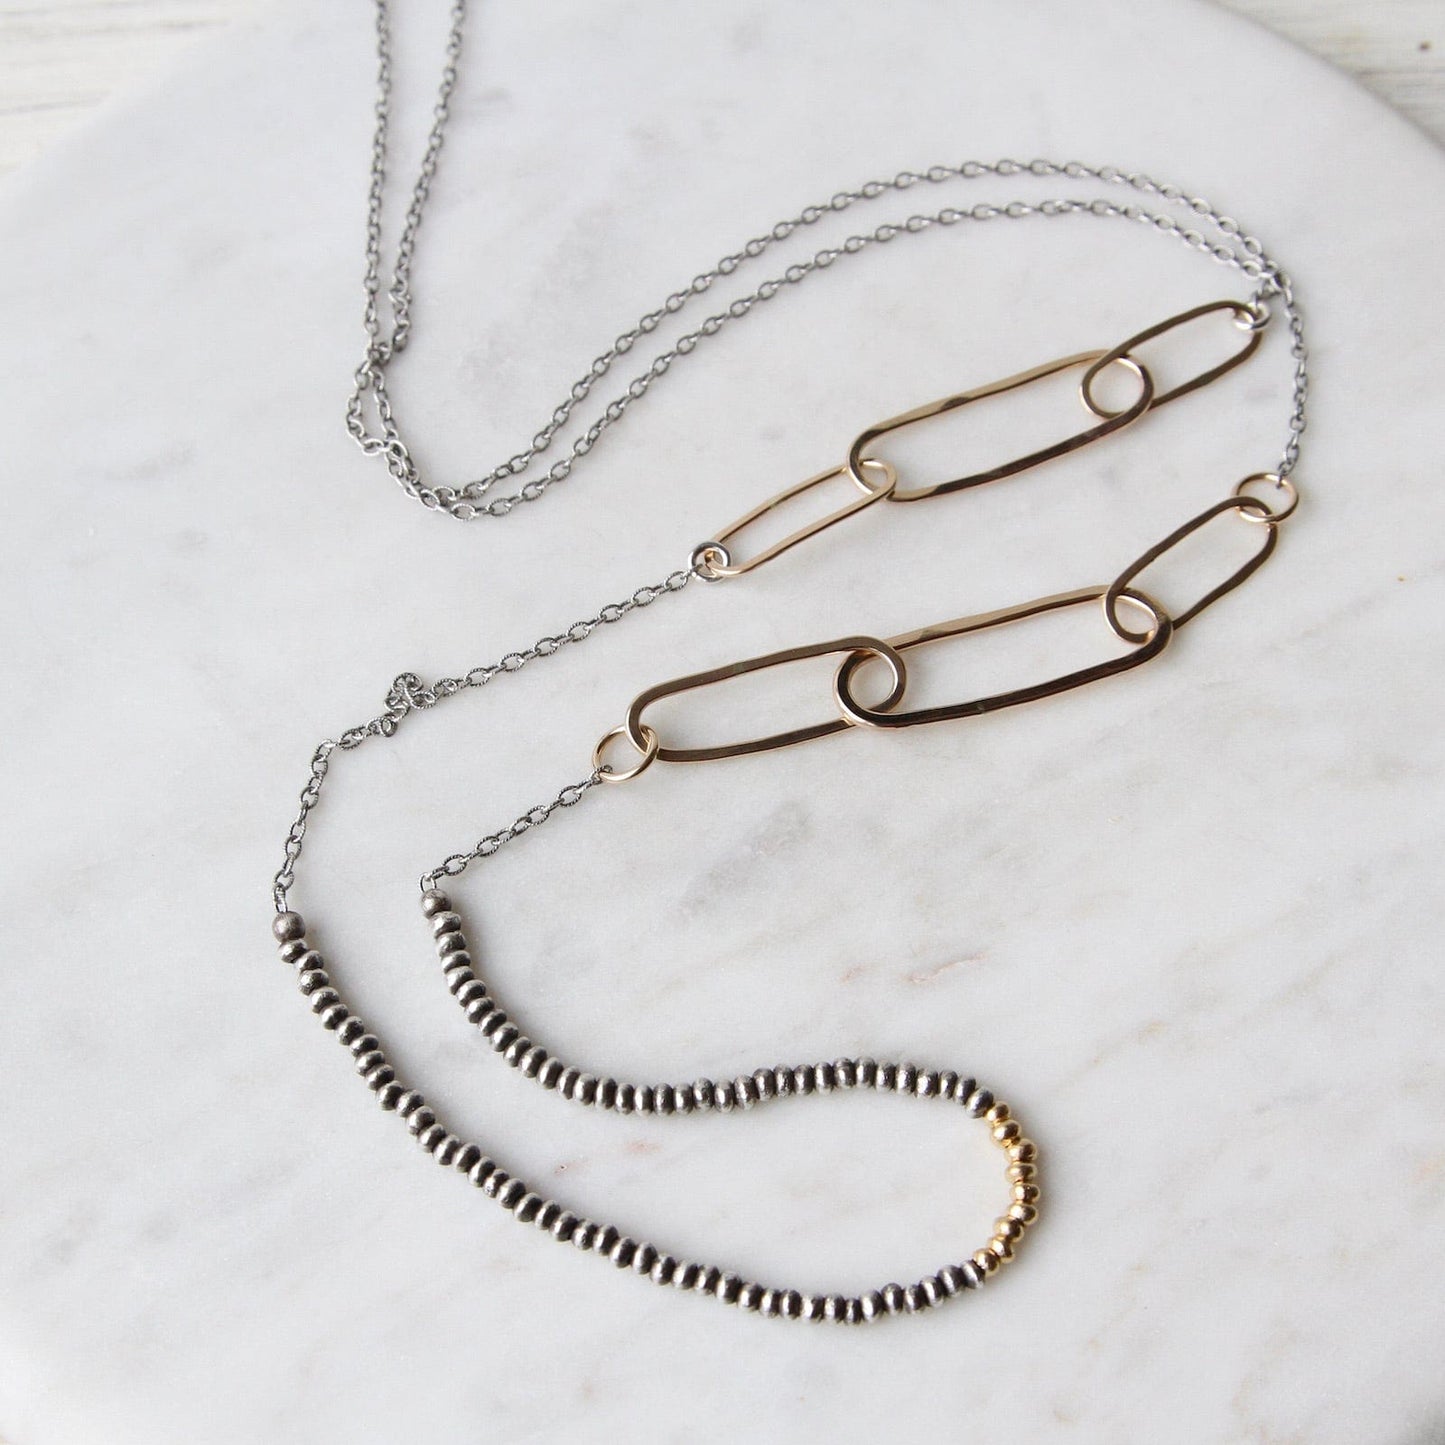 NKL-GF Oxidized Sterling Silver Nuggets & Gold Filled Necklace